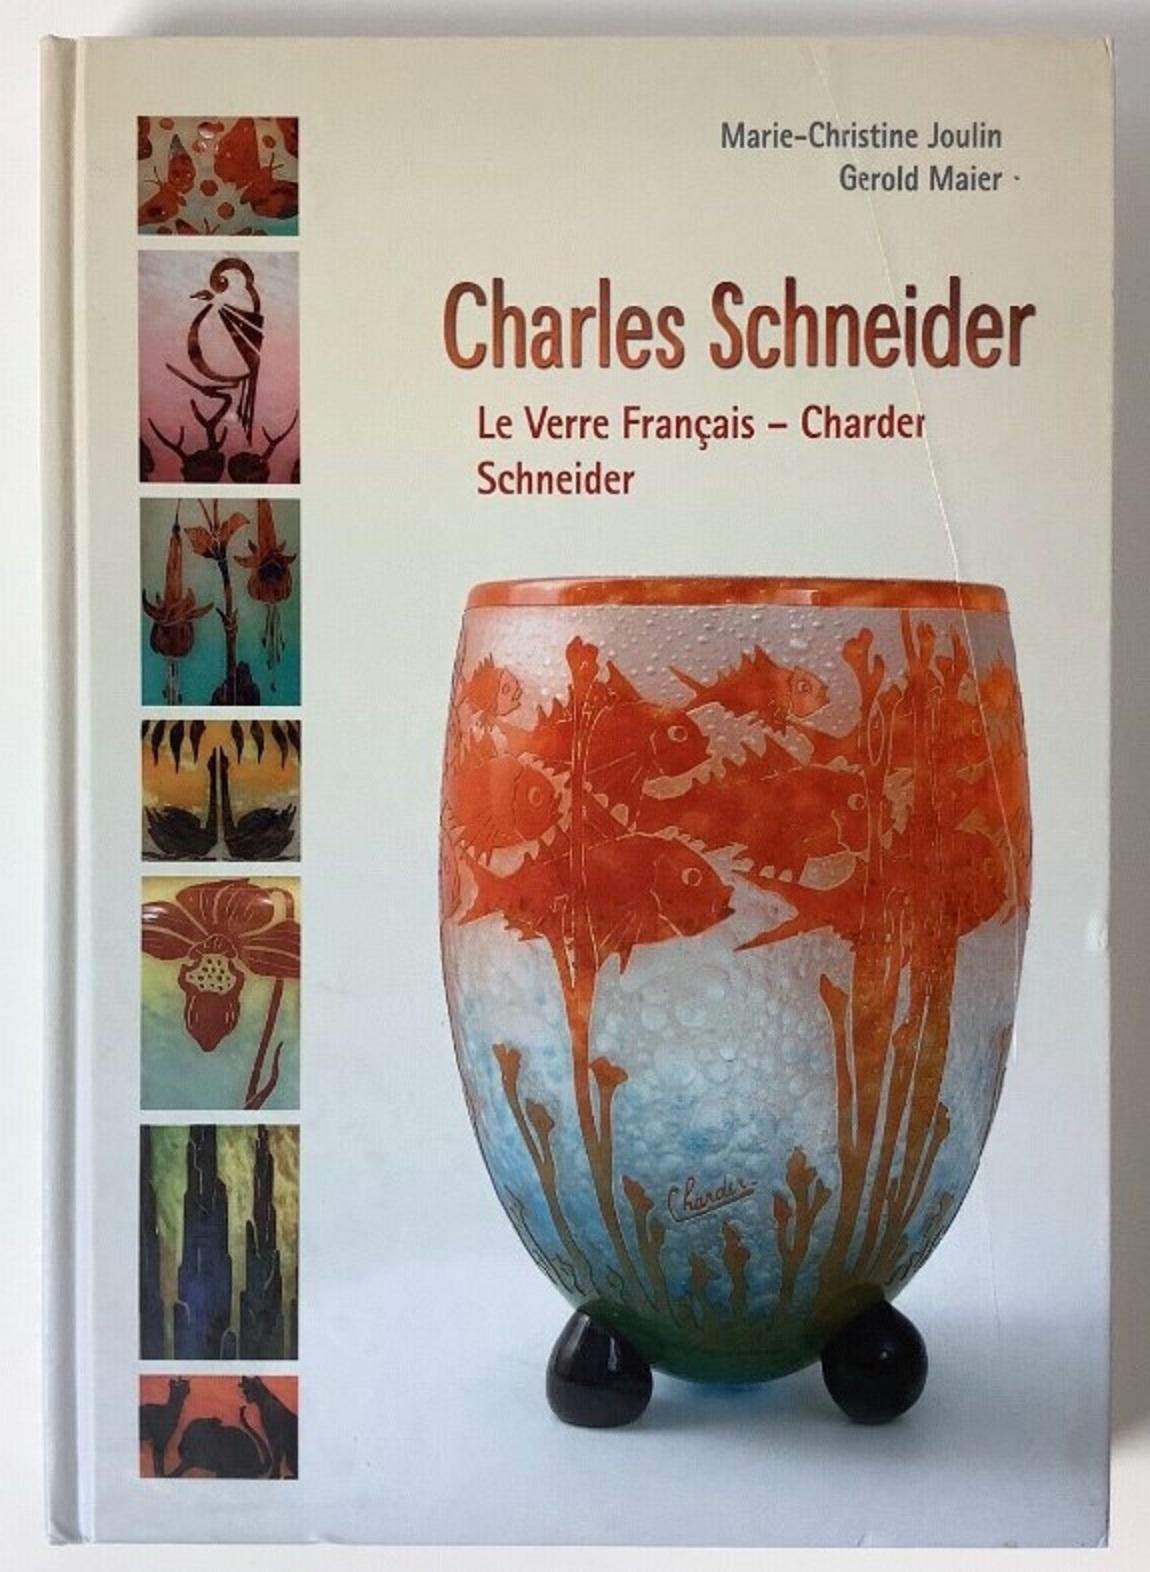 Monumental Vase Sign: Le Verre Francais 
acid worked
Le Verre cameo glass was a separate line of art glass designed by Charles Schneider. Its production was made at the same time as the Schneider designed glasses 1918 –1933. But from 1919 the two